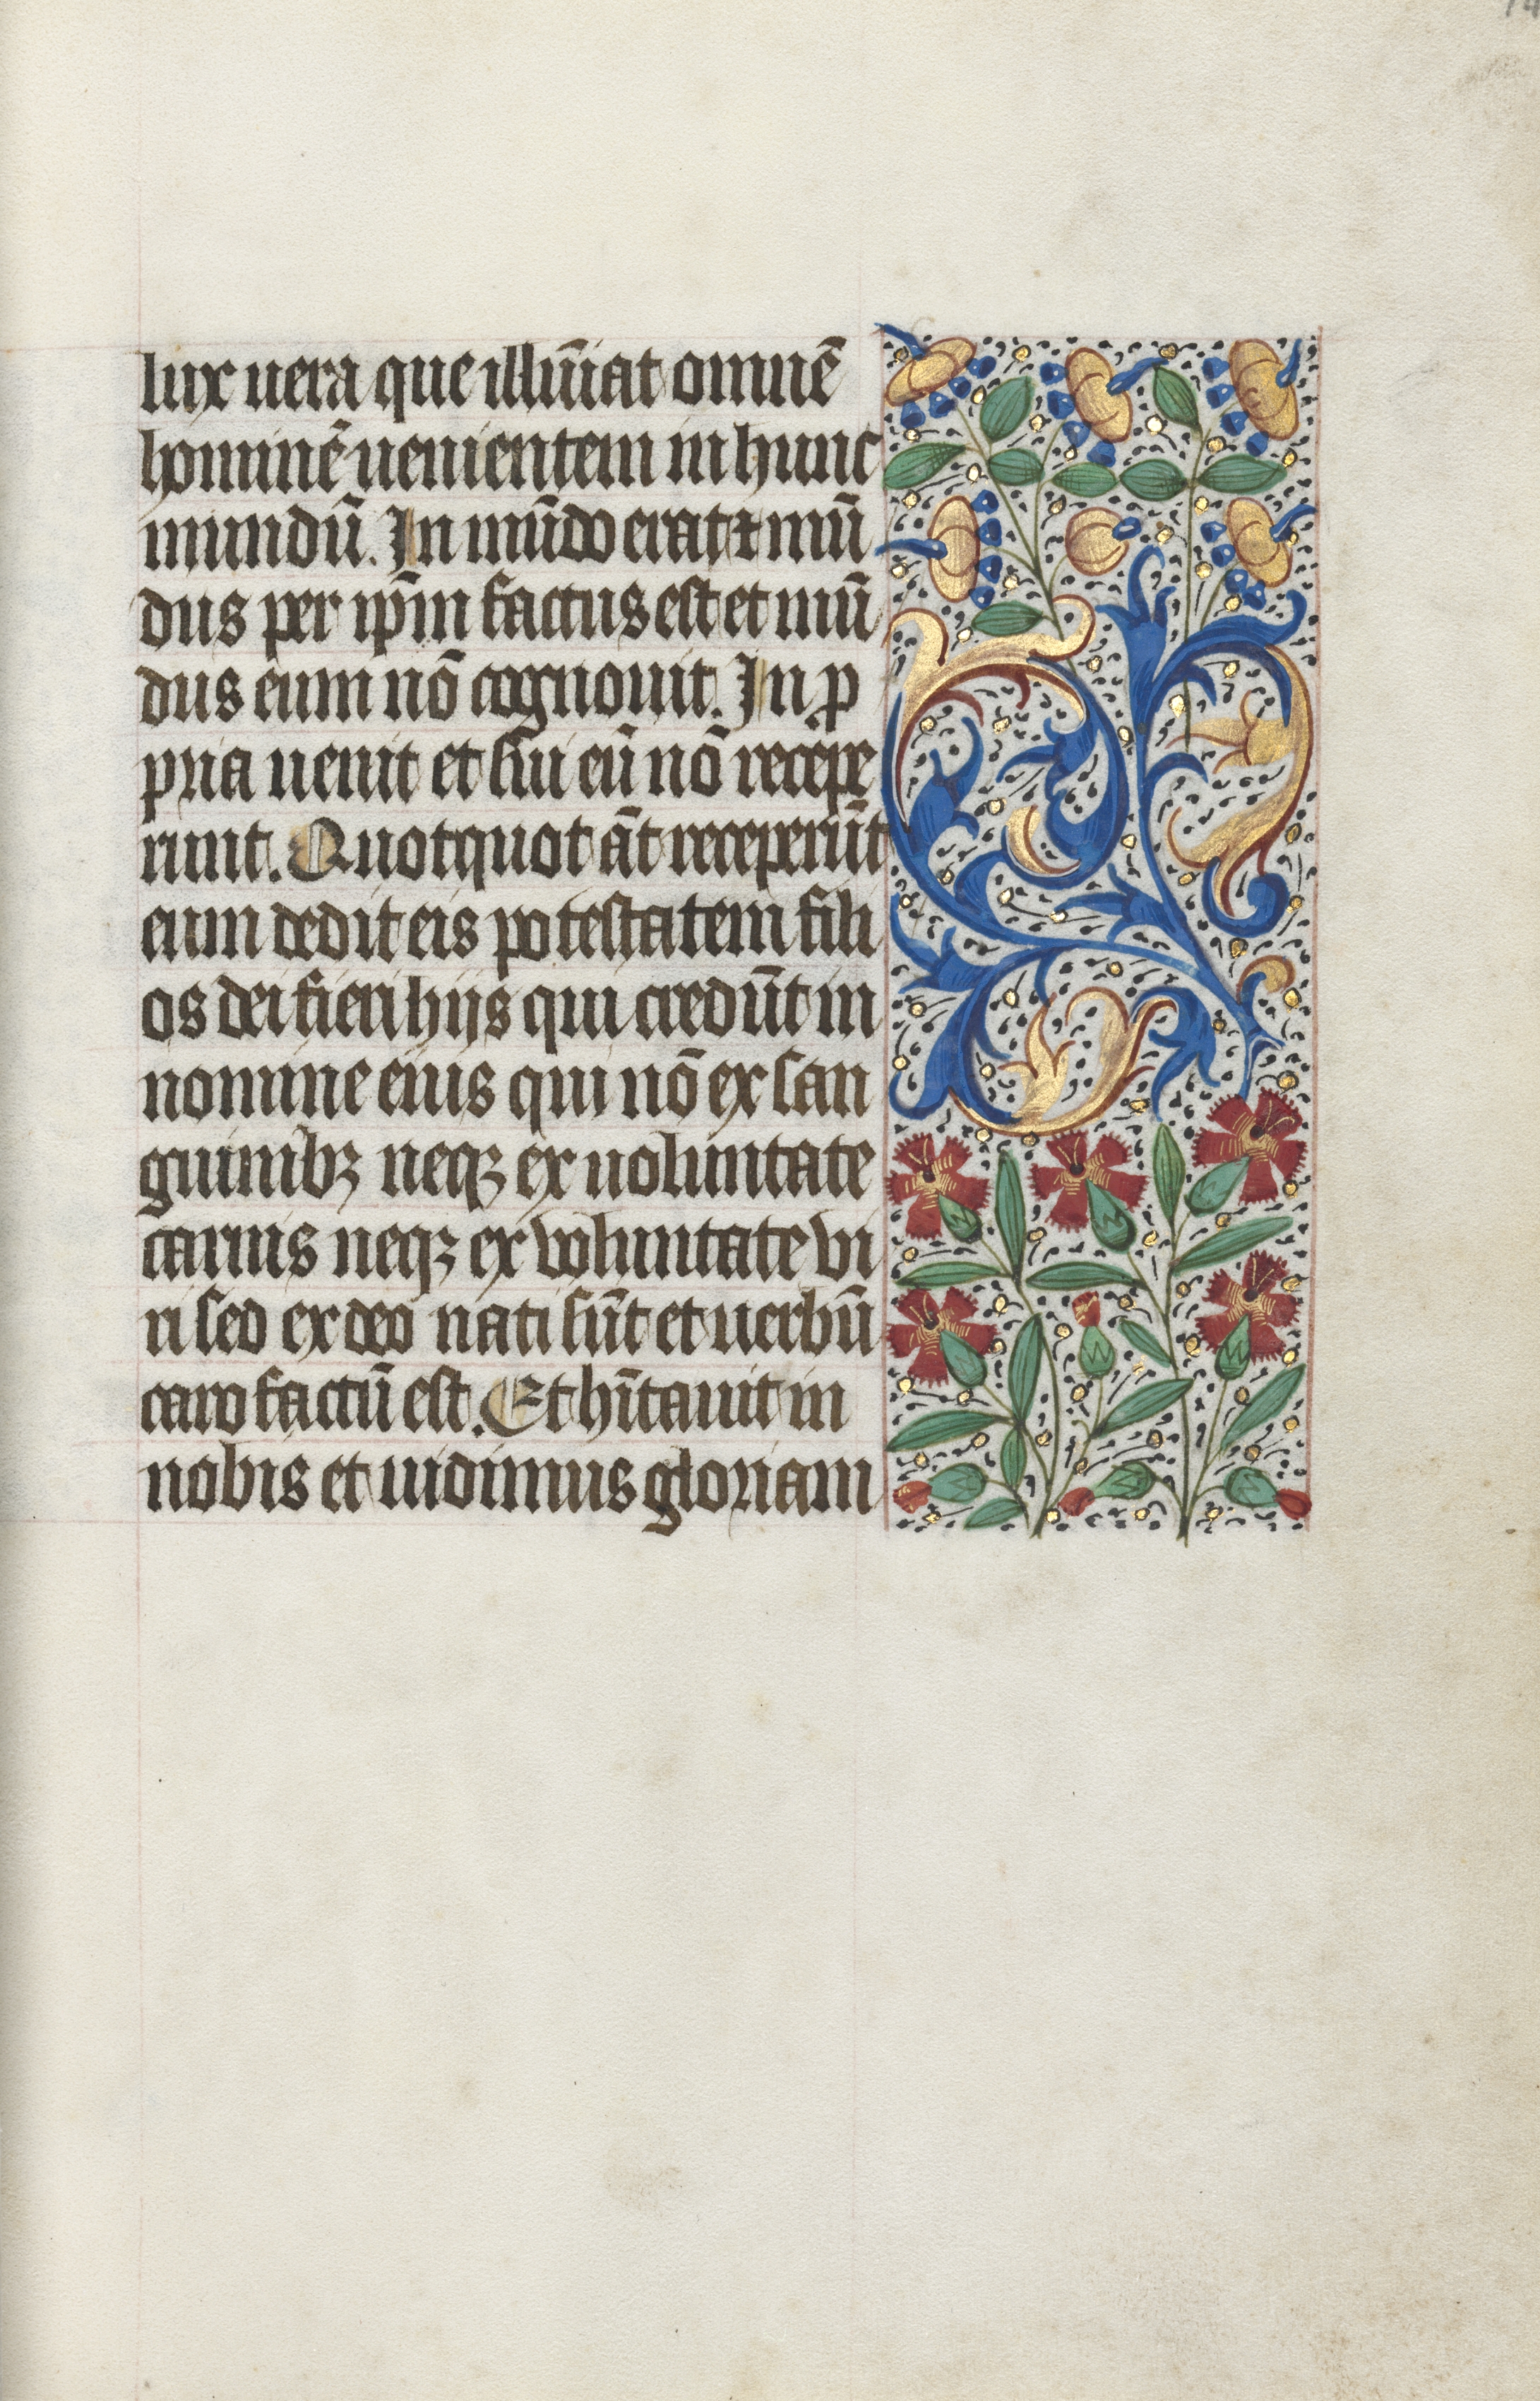 Book of Hours (Use of Rouen): fol. 14r